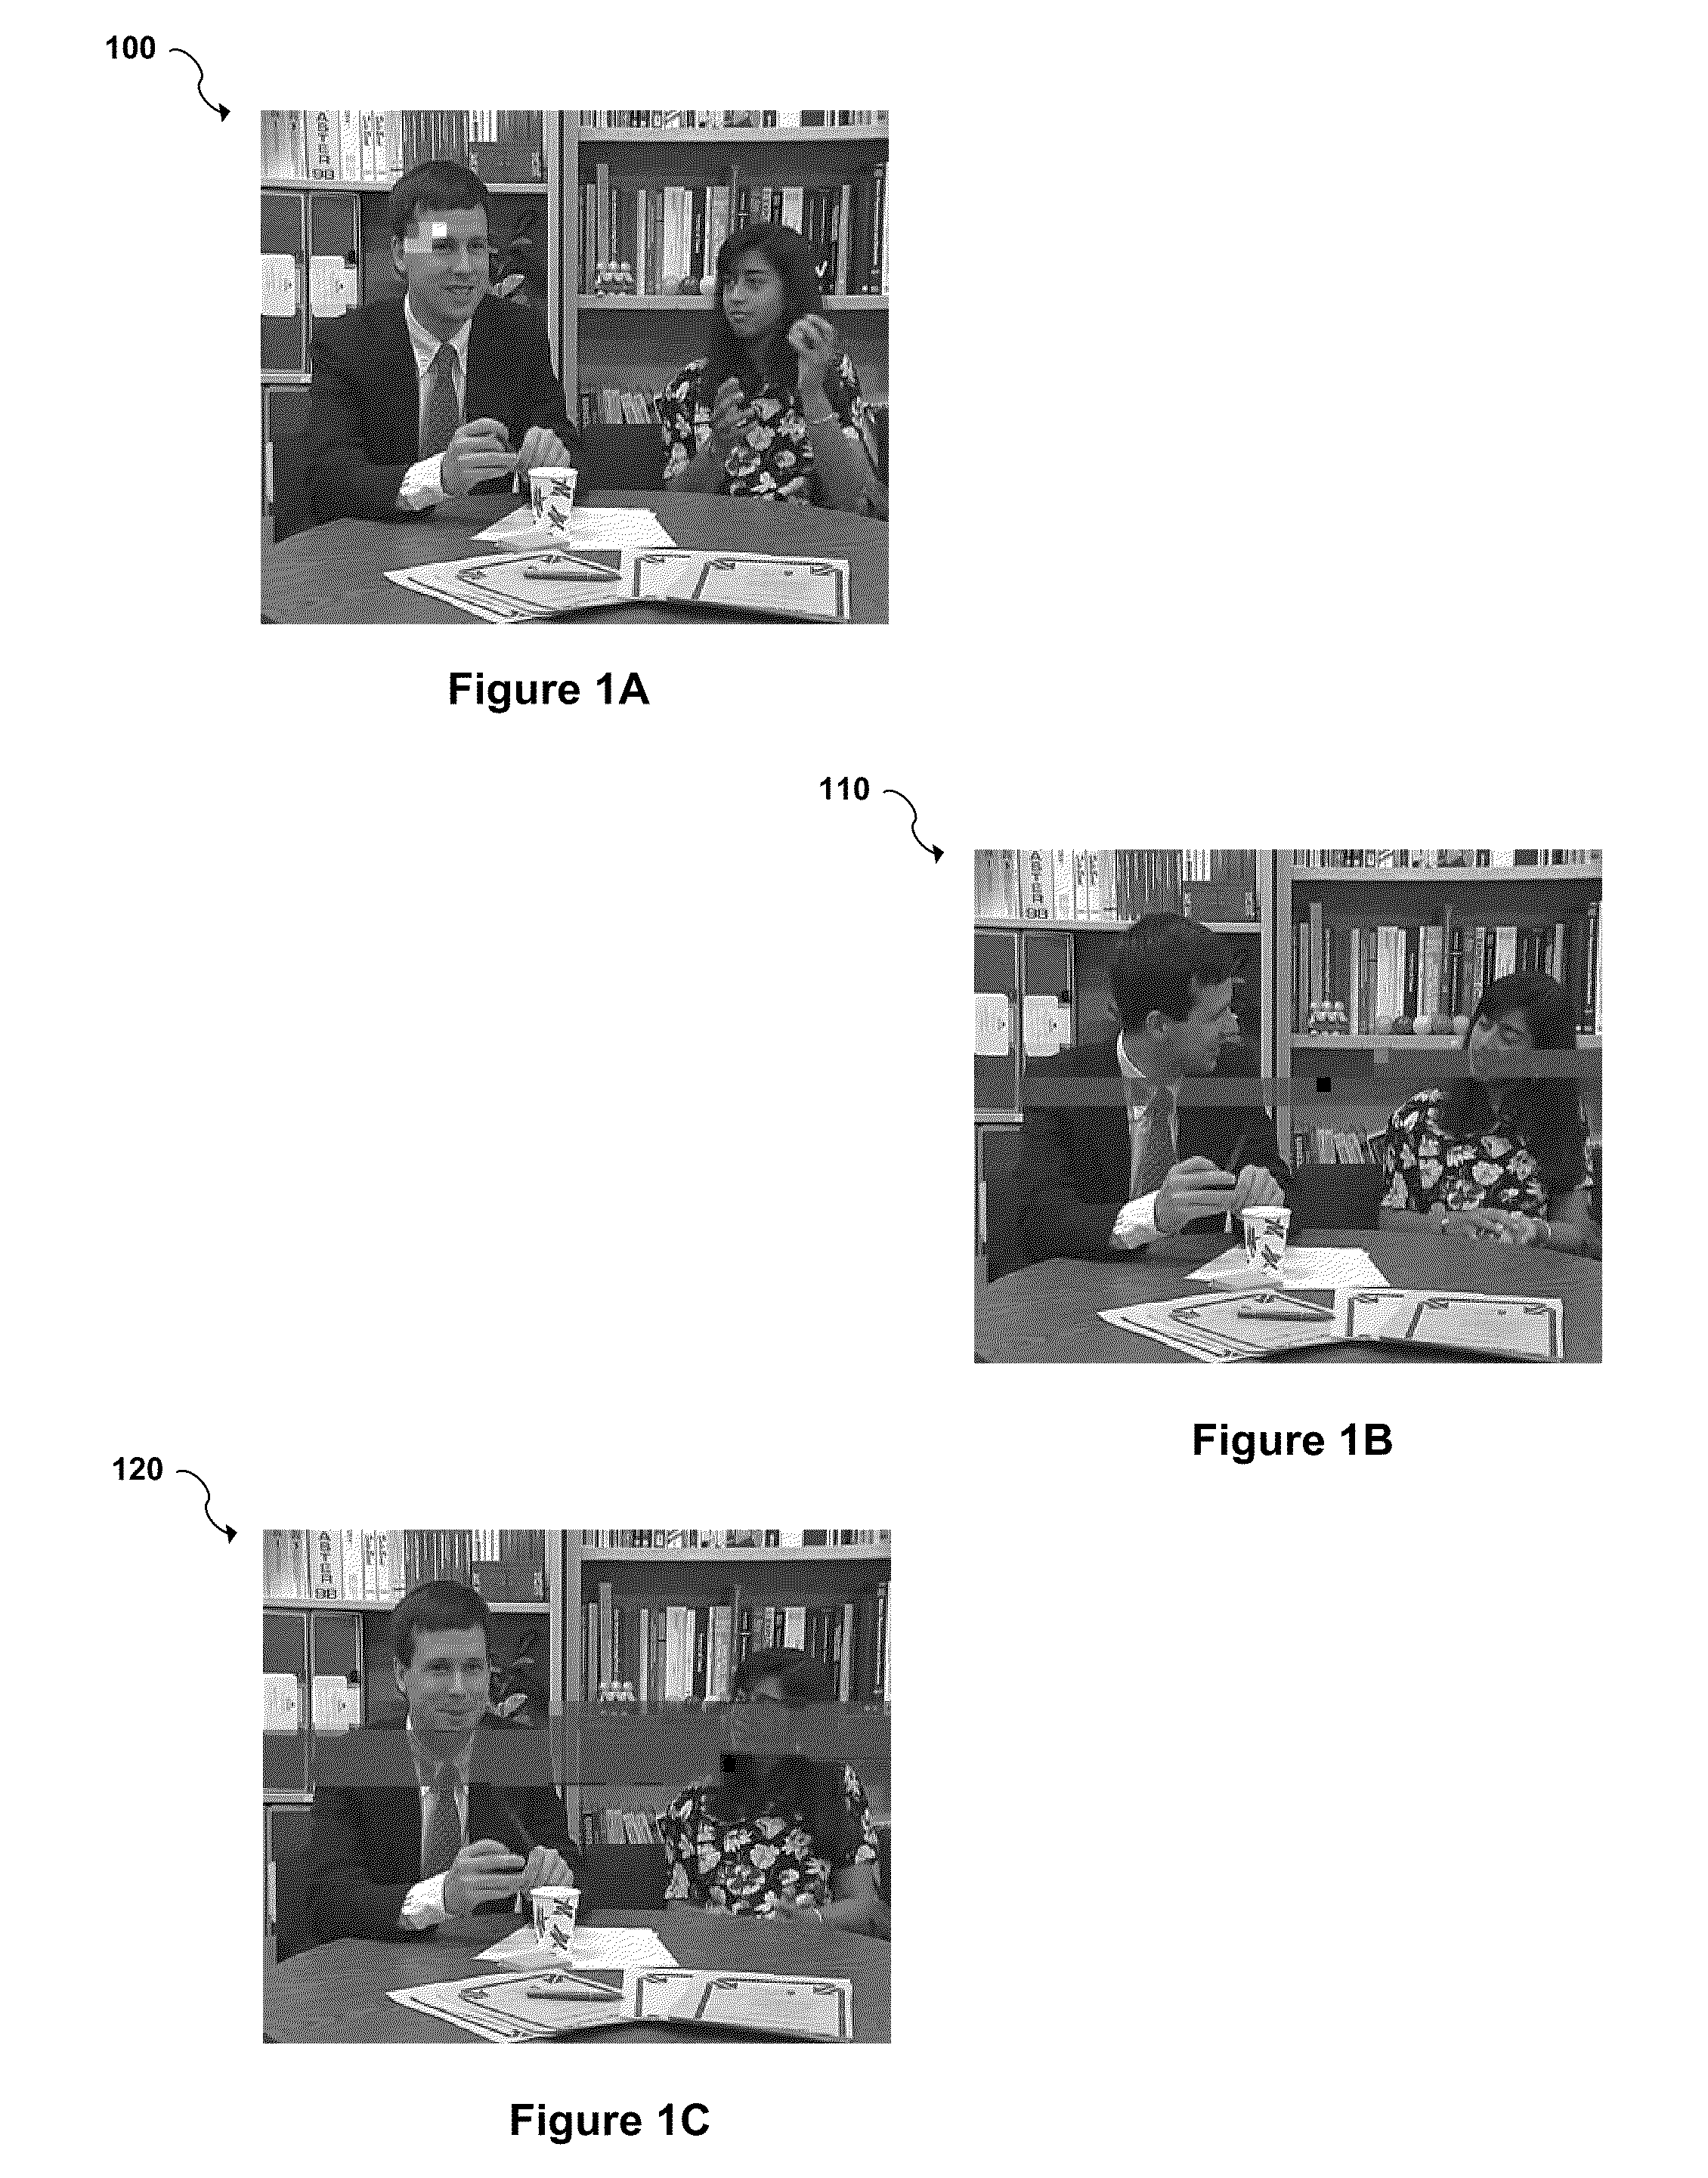 System and method for evaluating streaming multimedia quality